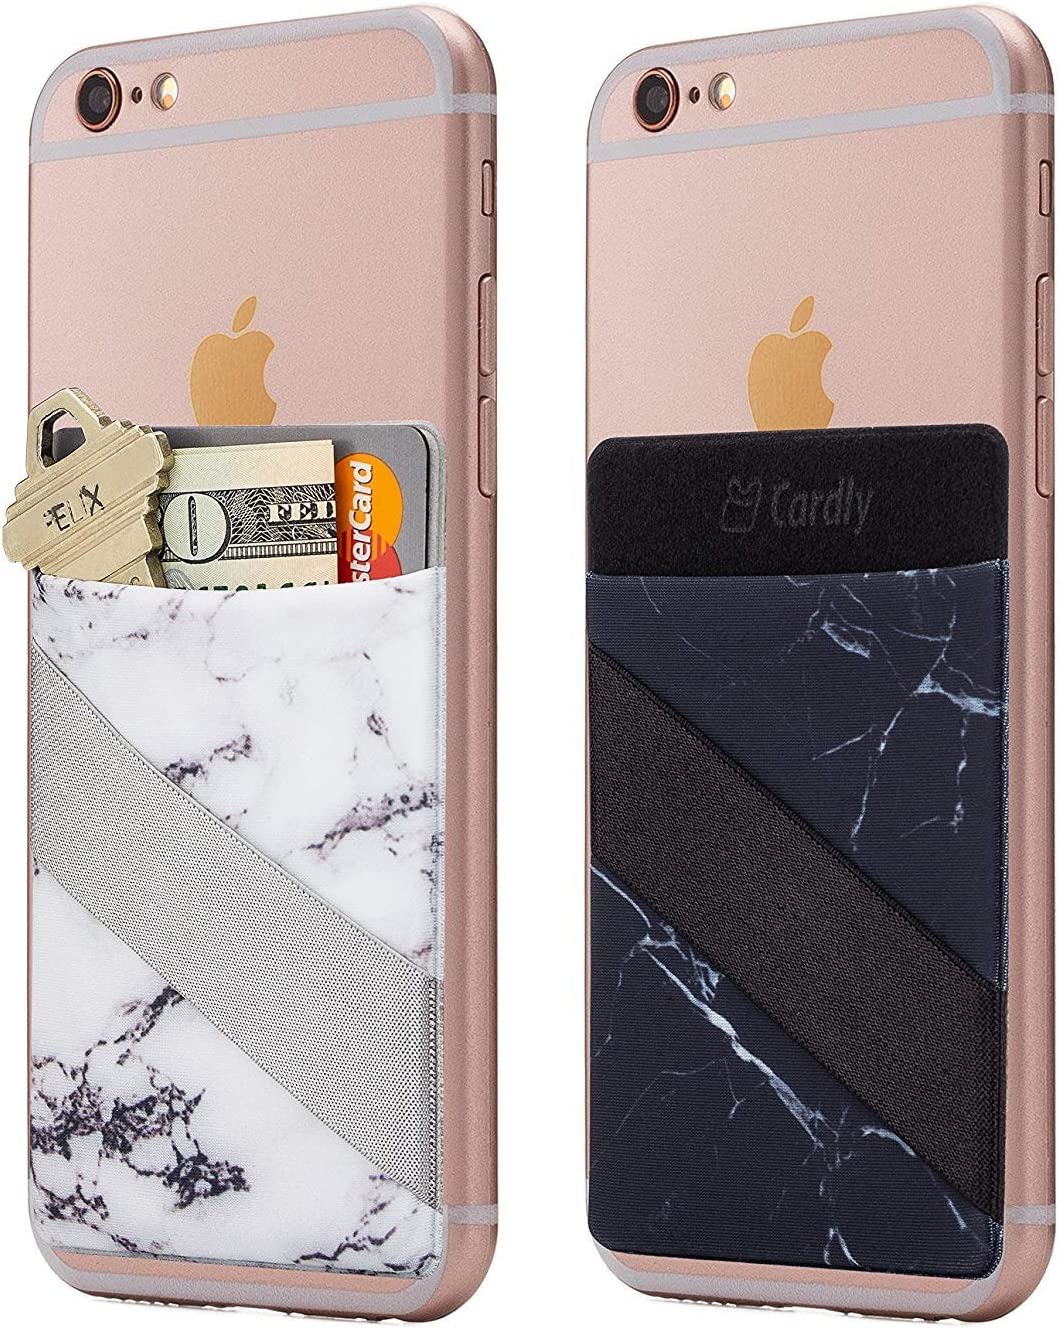 Cardly (Two) Finger Strap Cell Phone Stick on Wallet Card Holder Phone Pocket for iPhone, Android and All Smartphones.